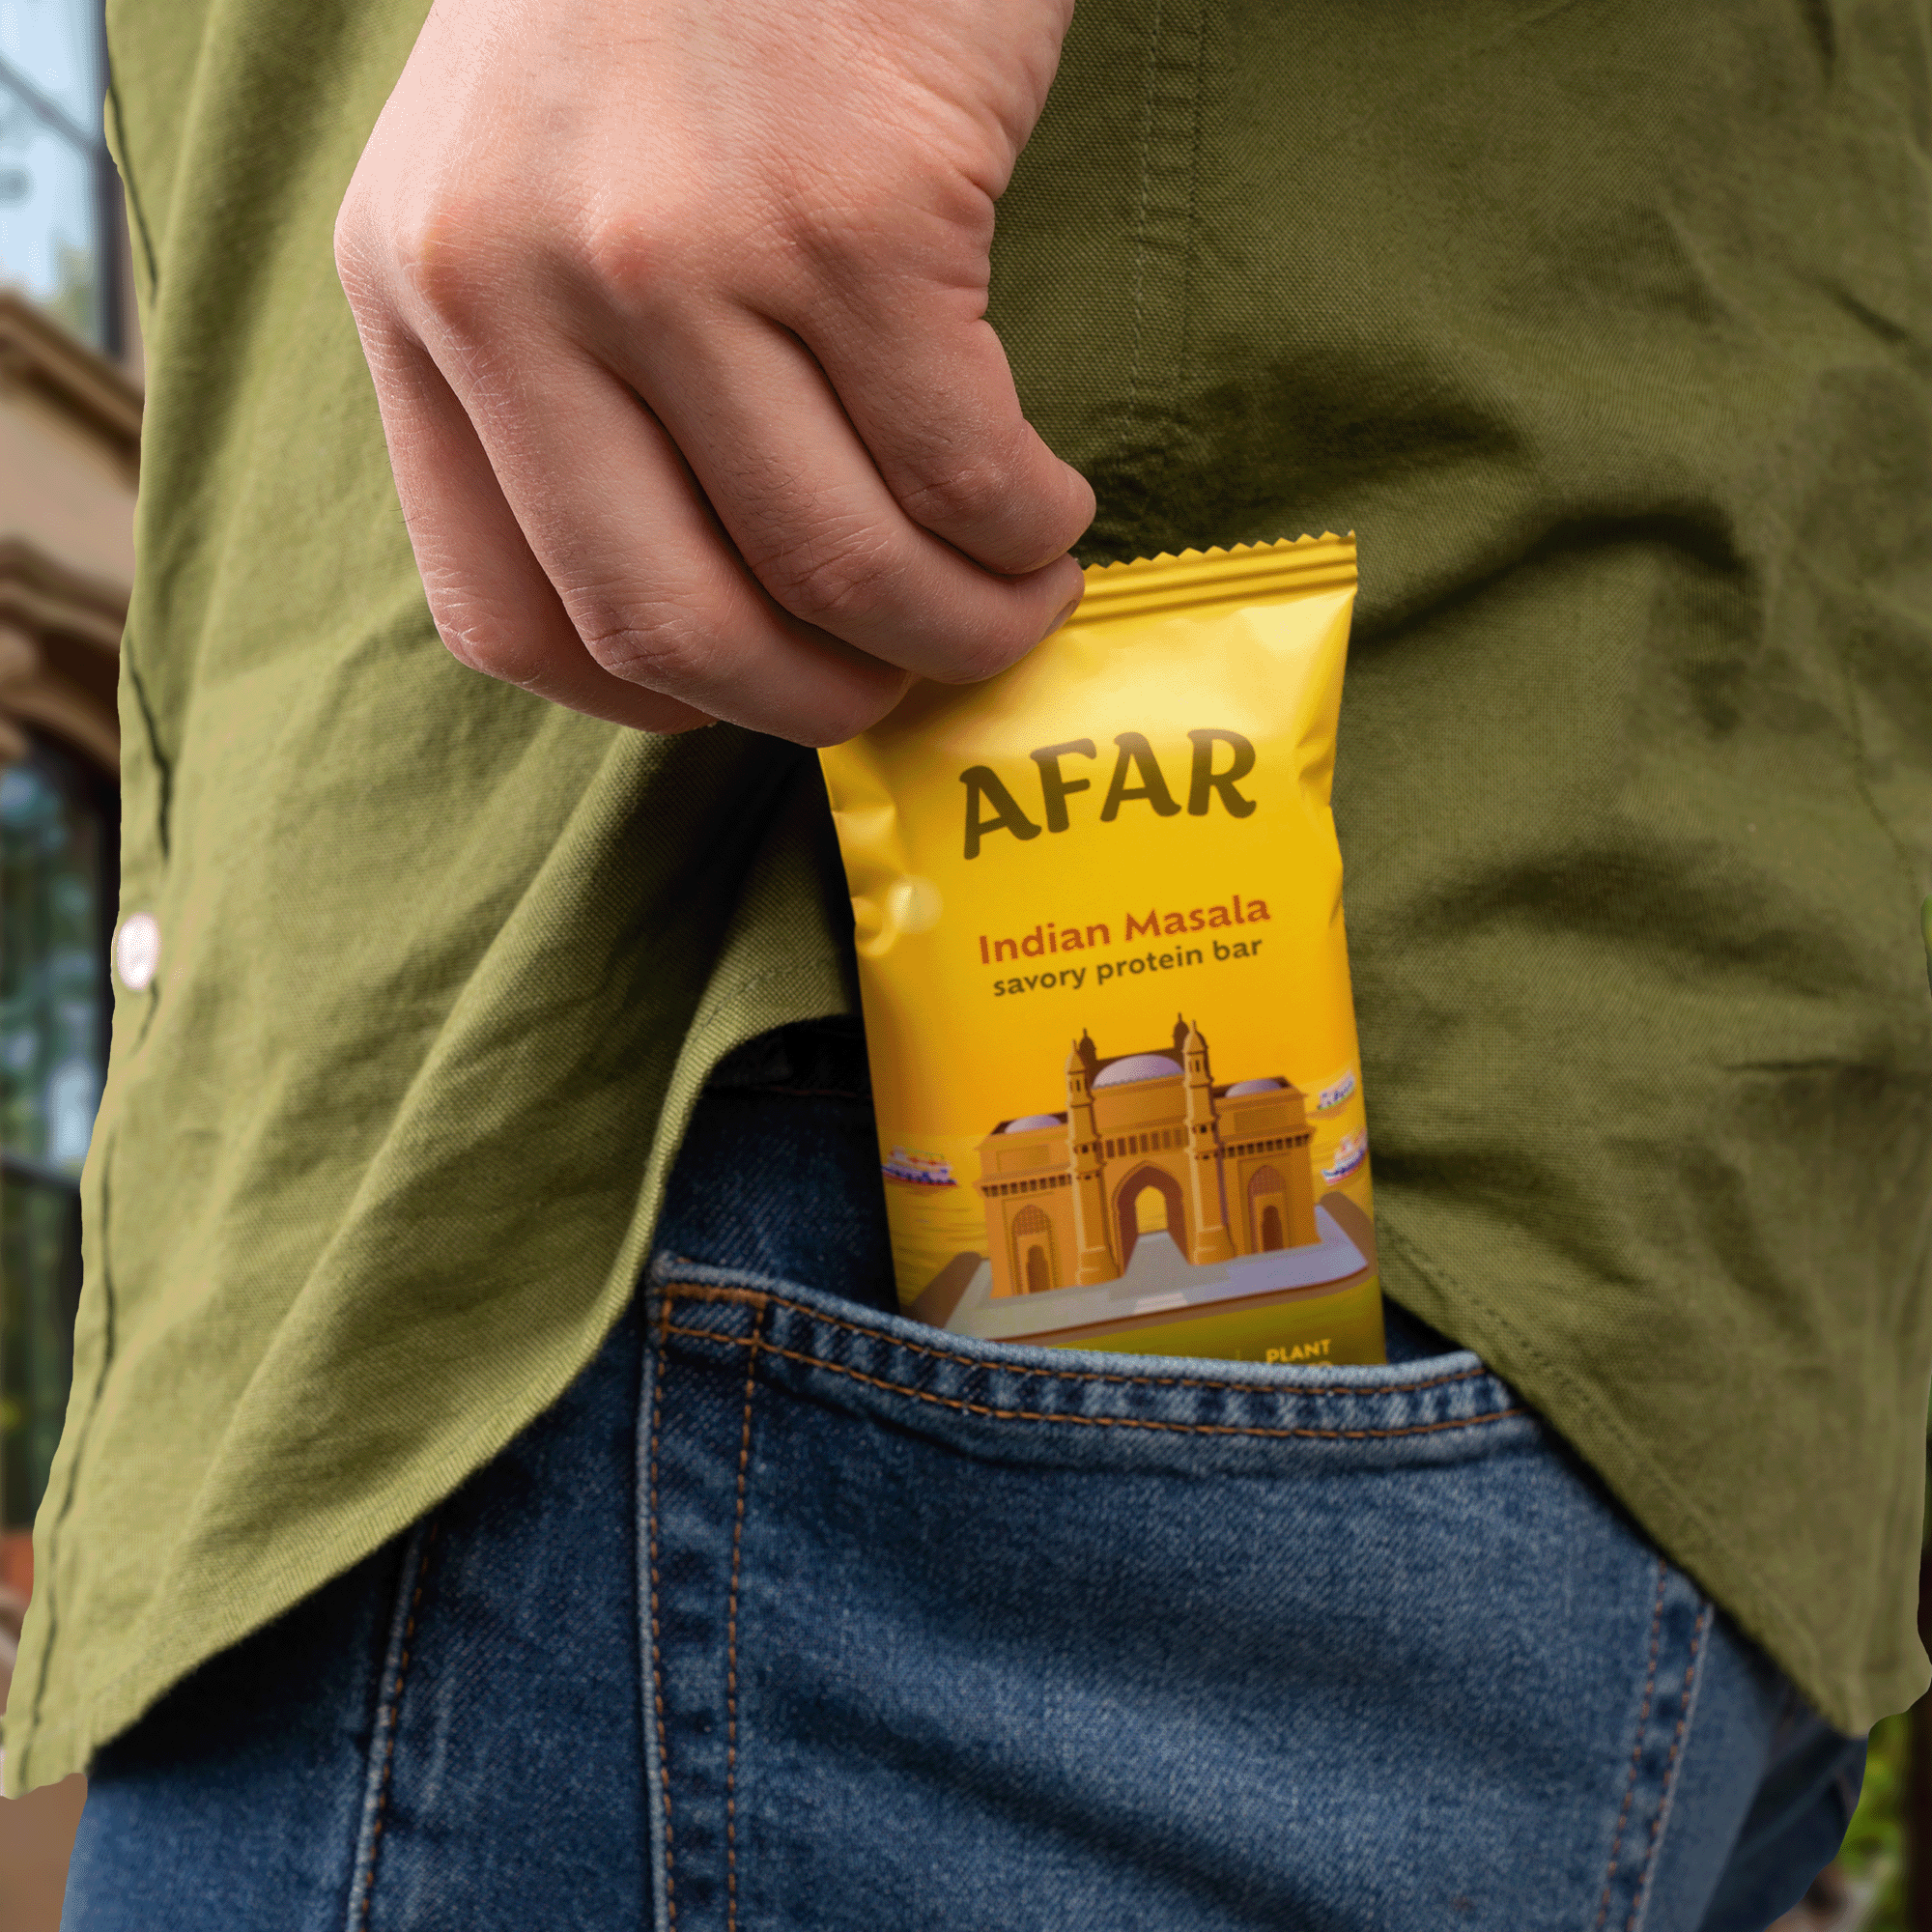 Afar savory protein bars are made with clean, plant-based ingredients like nuts, seeds, brown rice crisps, soy crisps, and spices and herbs. They’re grain-free, dairy-free, and contain no artificial flavors or colors. They're naturally low in sugar - free of the stevia, sugar alcohols, and artificial sweeteners in other low sugar bars.